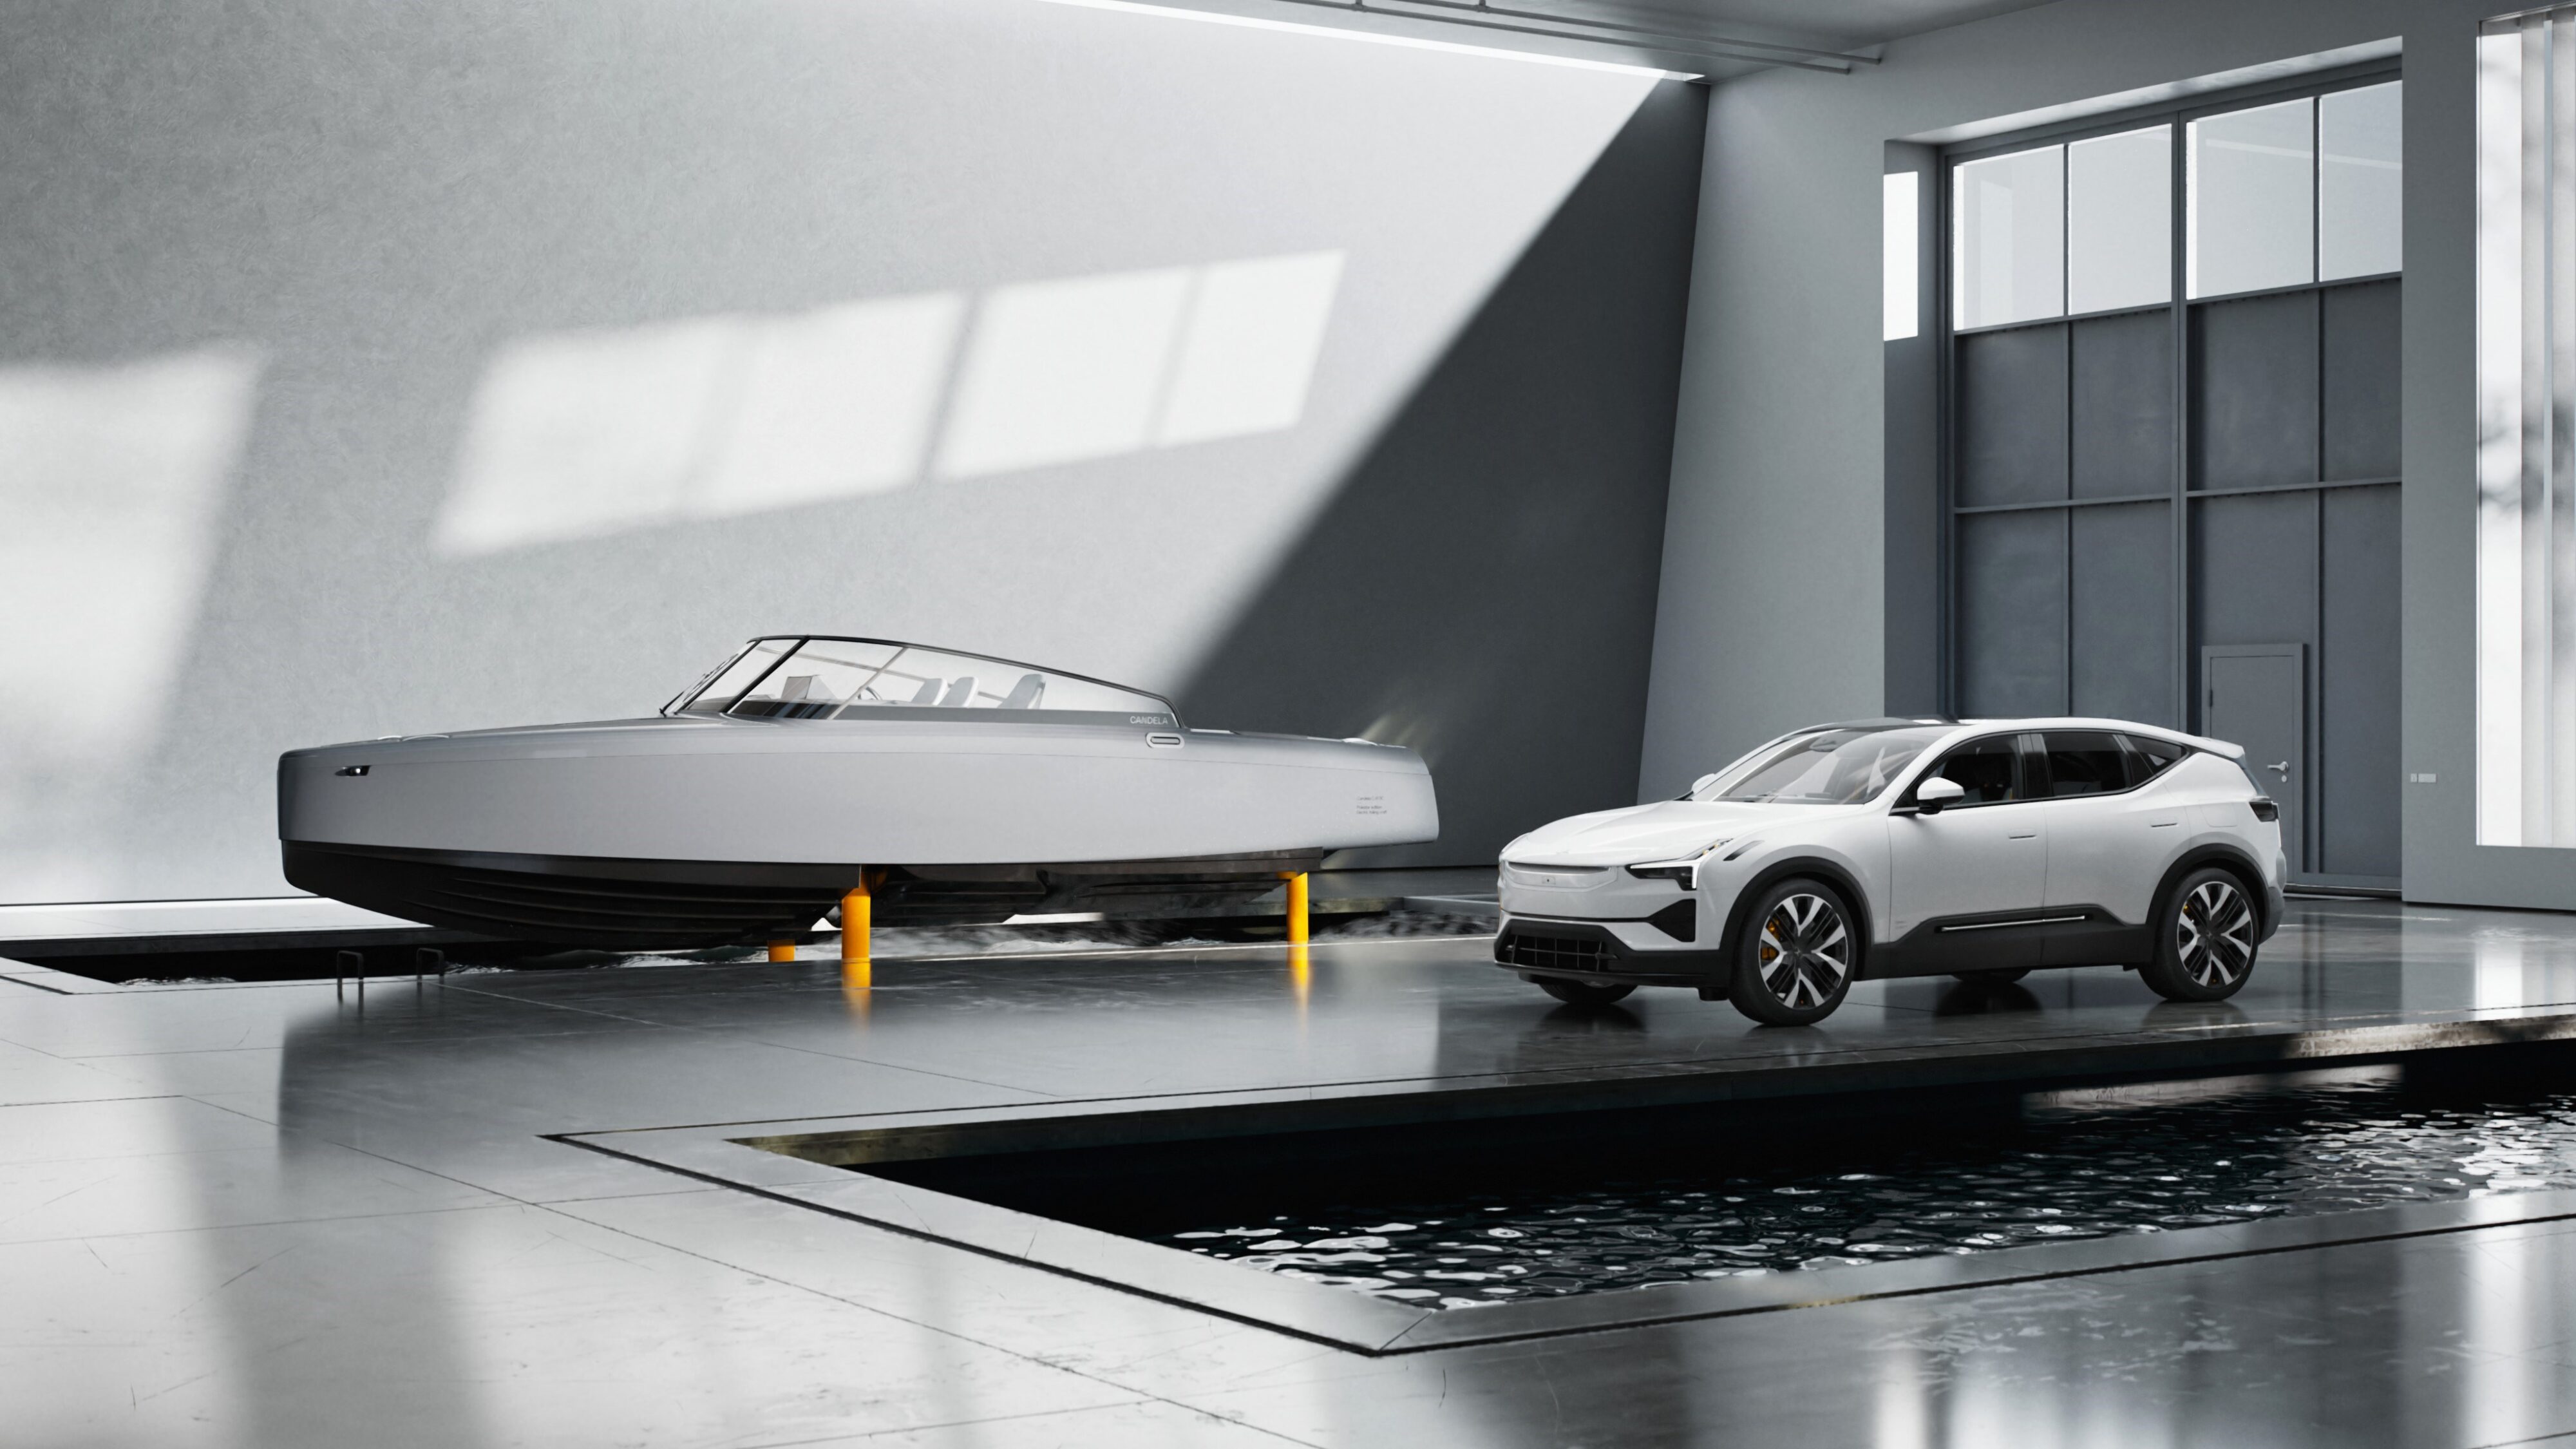 A Polestar car pictured with the Candela C-8 Polestar edition